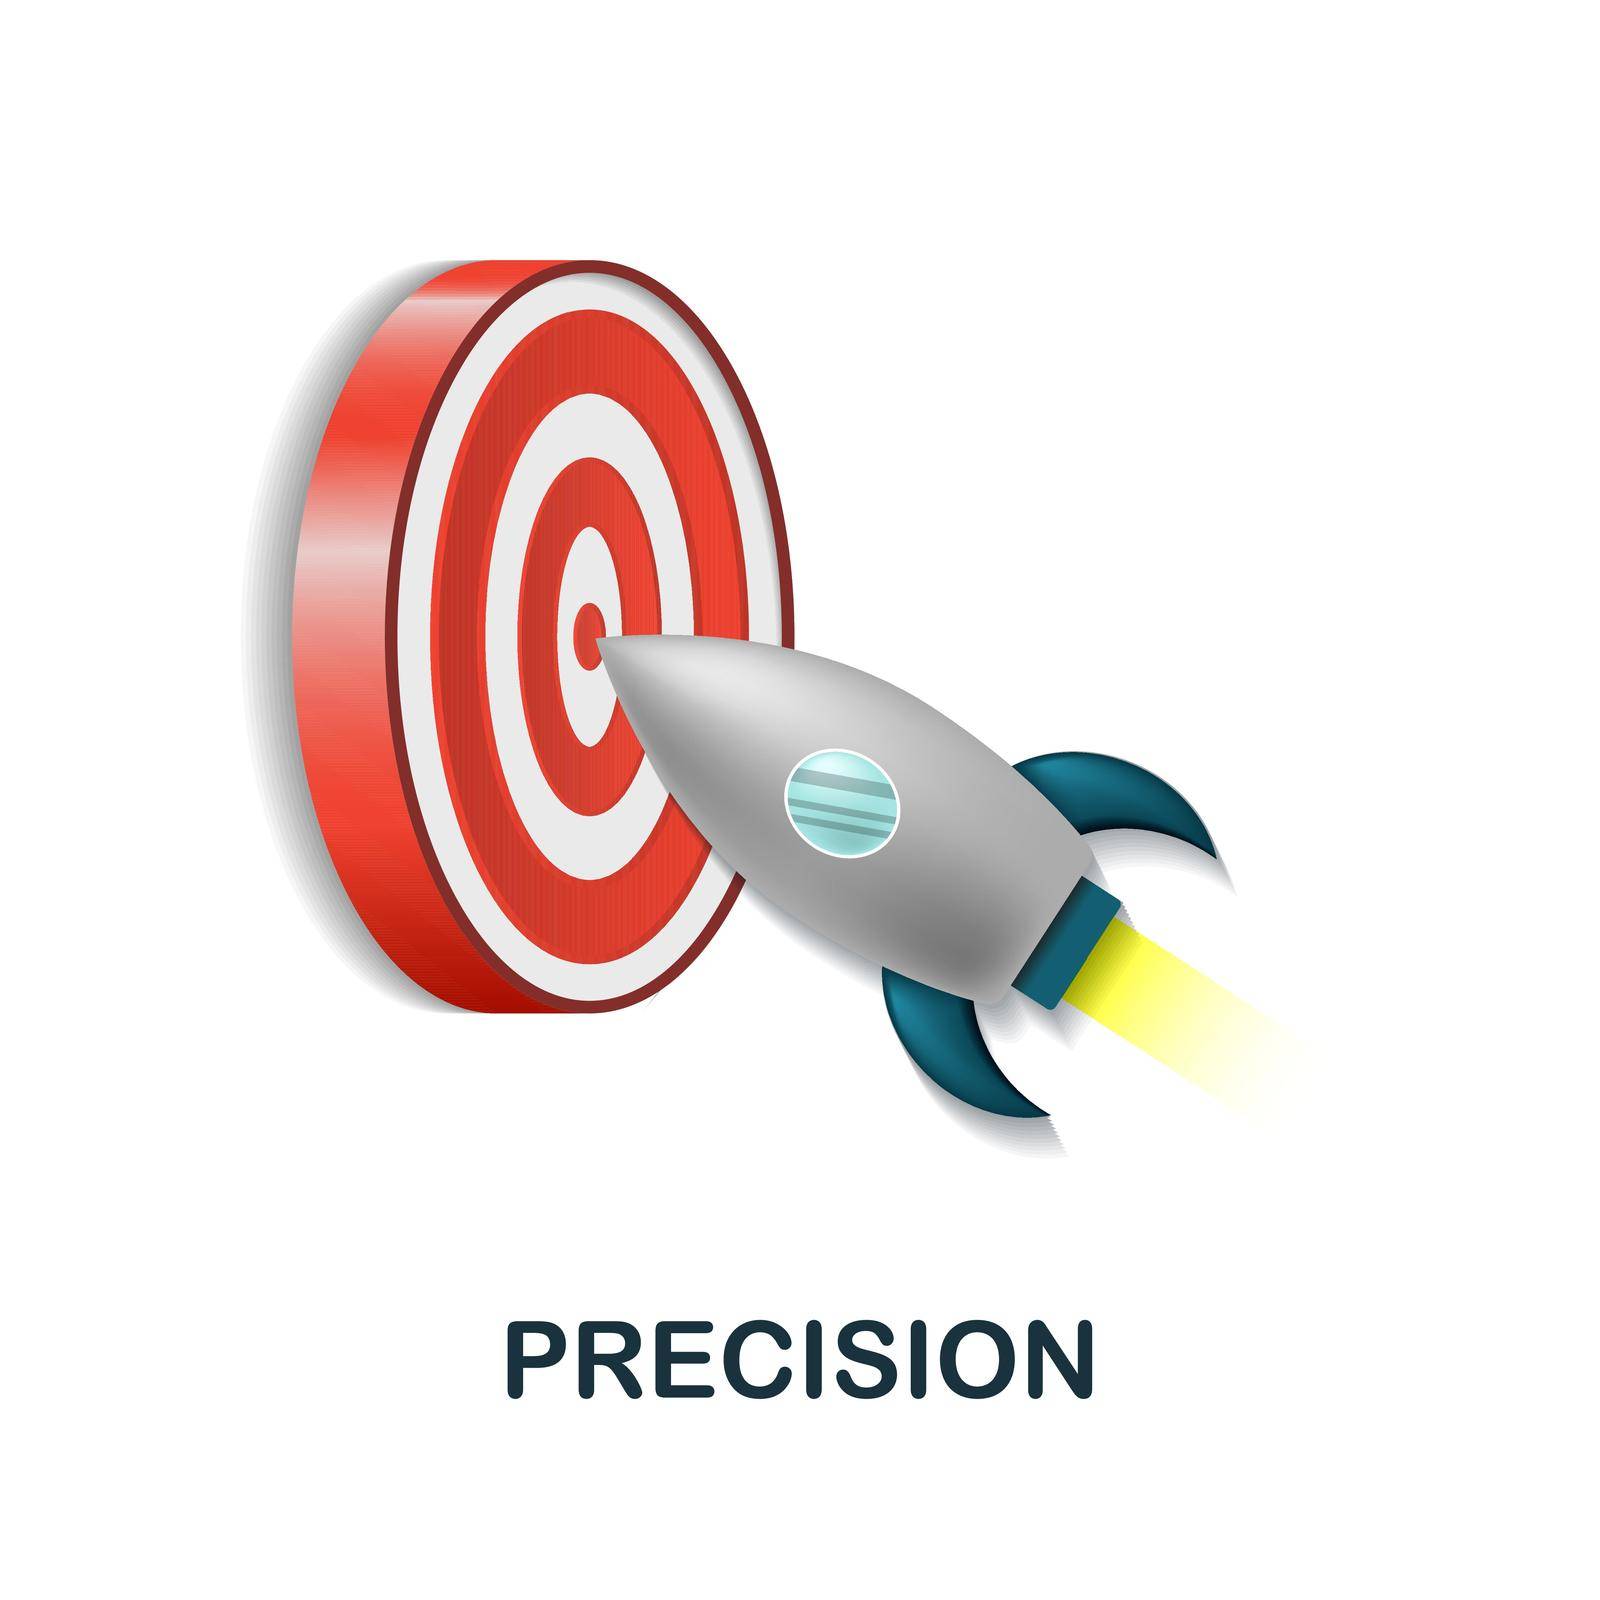 Precision icon. 3d illustration from startup collection. Creative Precision 3d icon for web design, templates, infographics and more by simakovavector